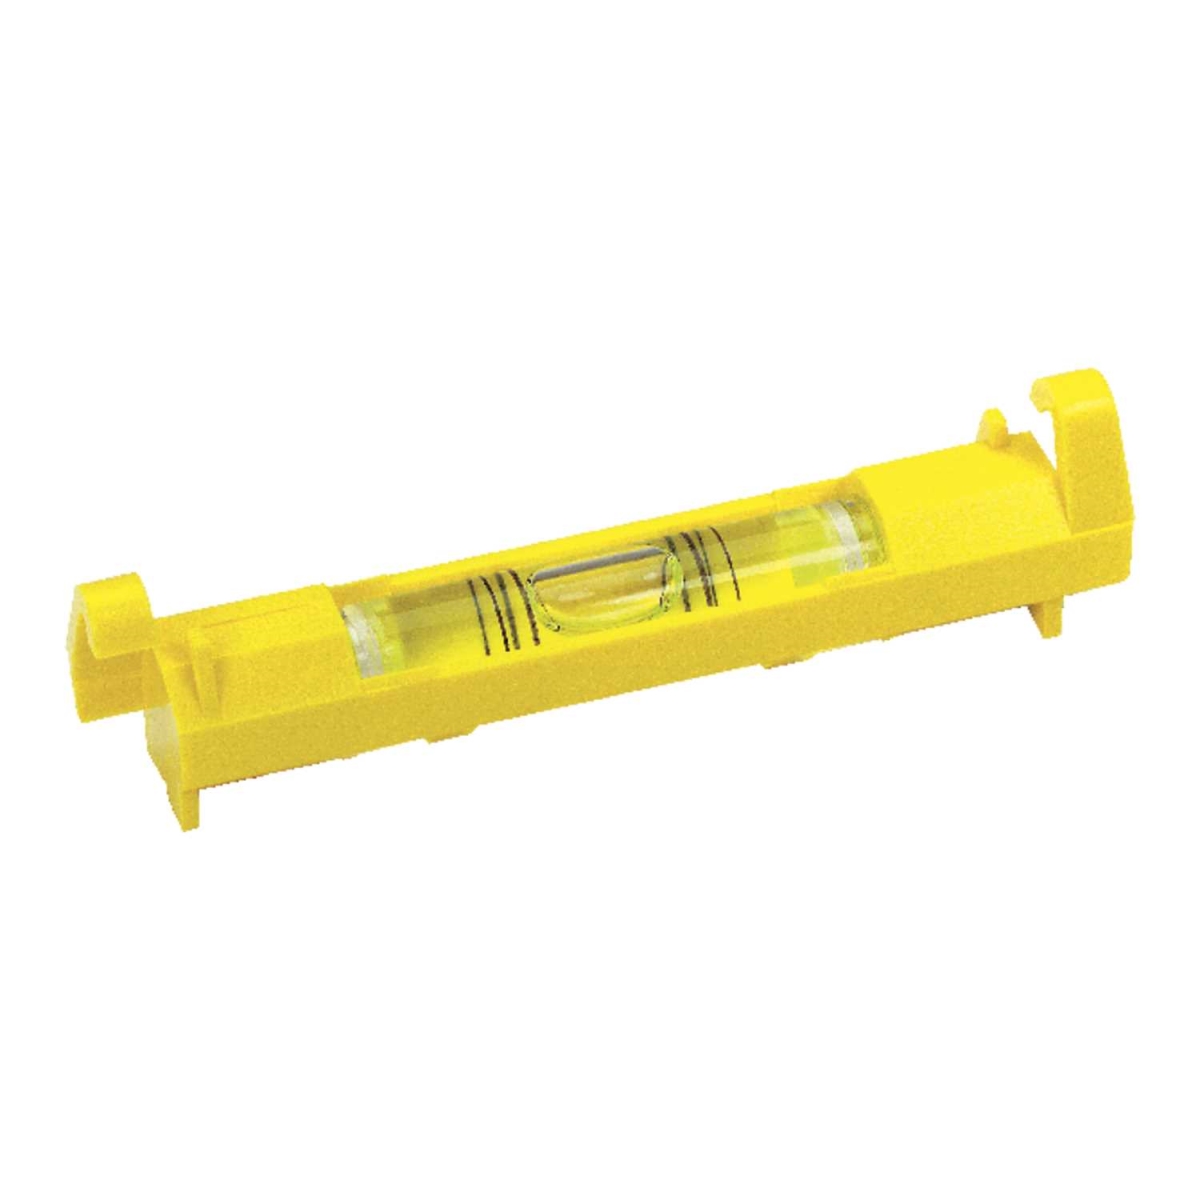 Picture of Stanley Works Tools 42193 Line Level - High Visibility Plastic - 3.09 in.